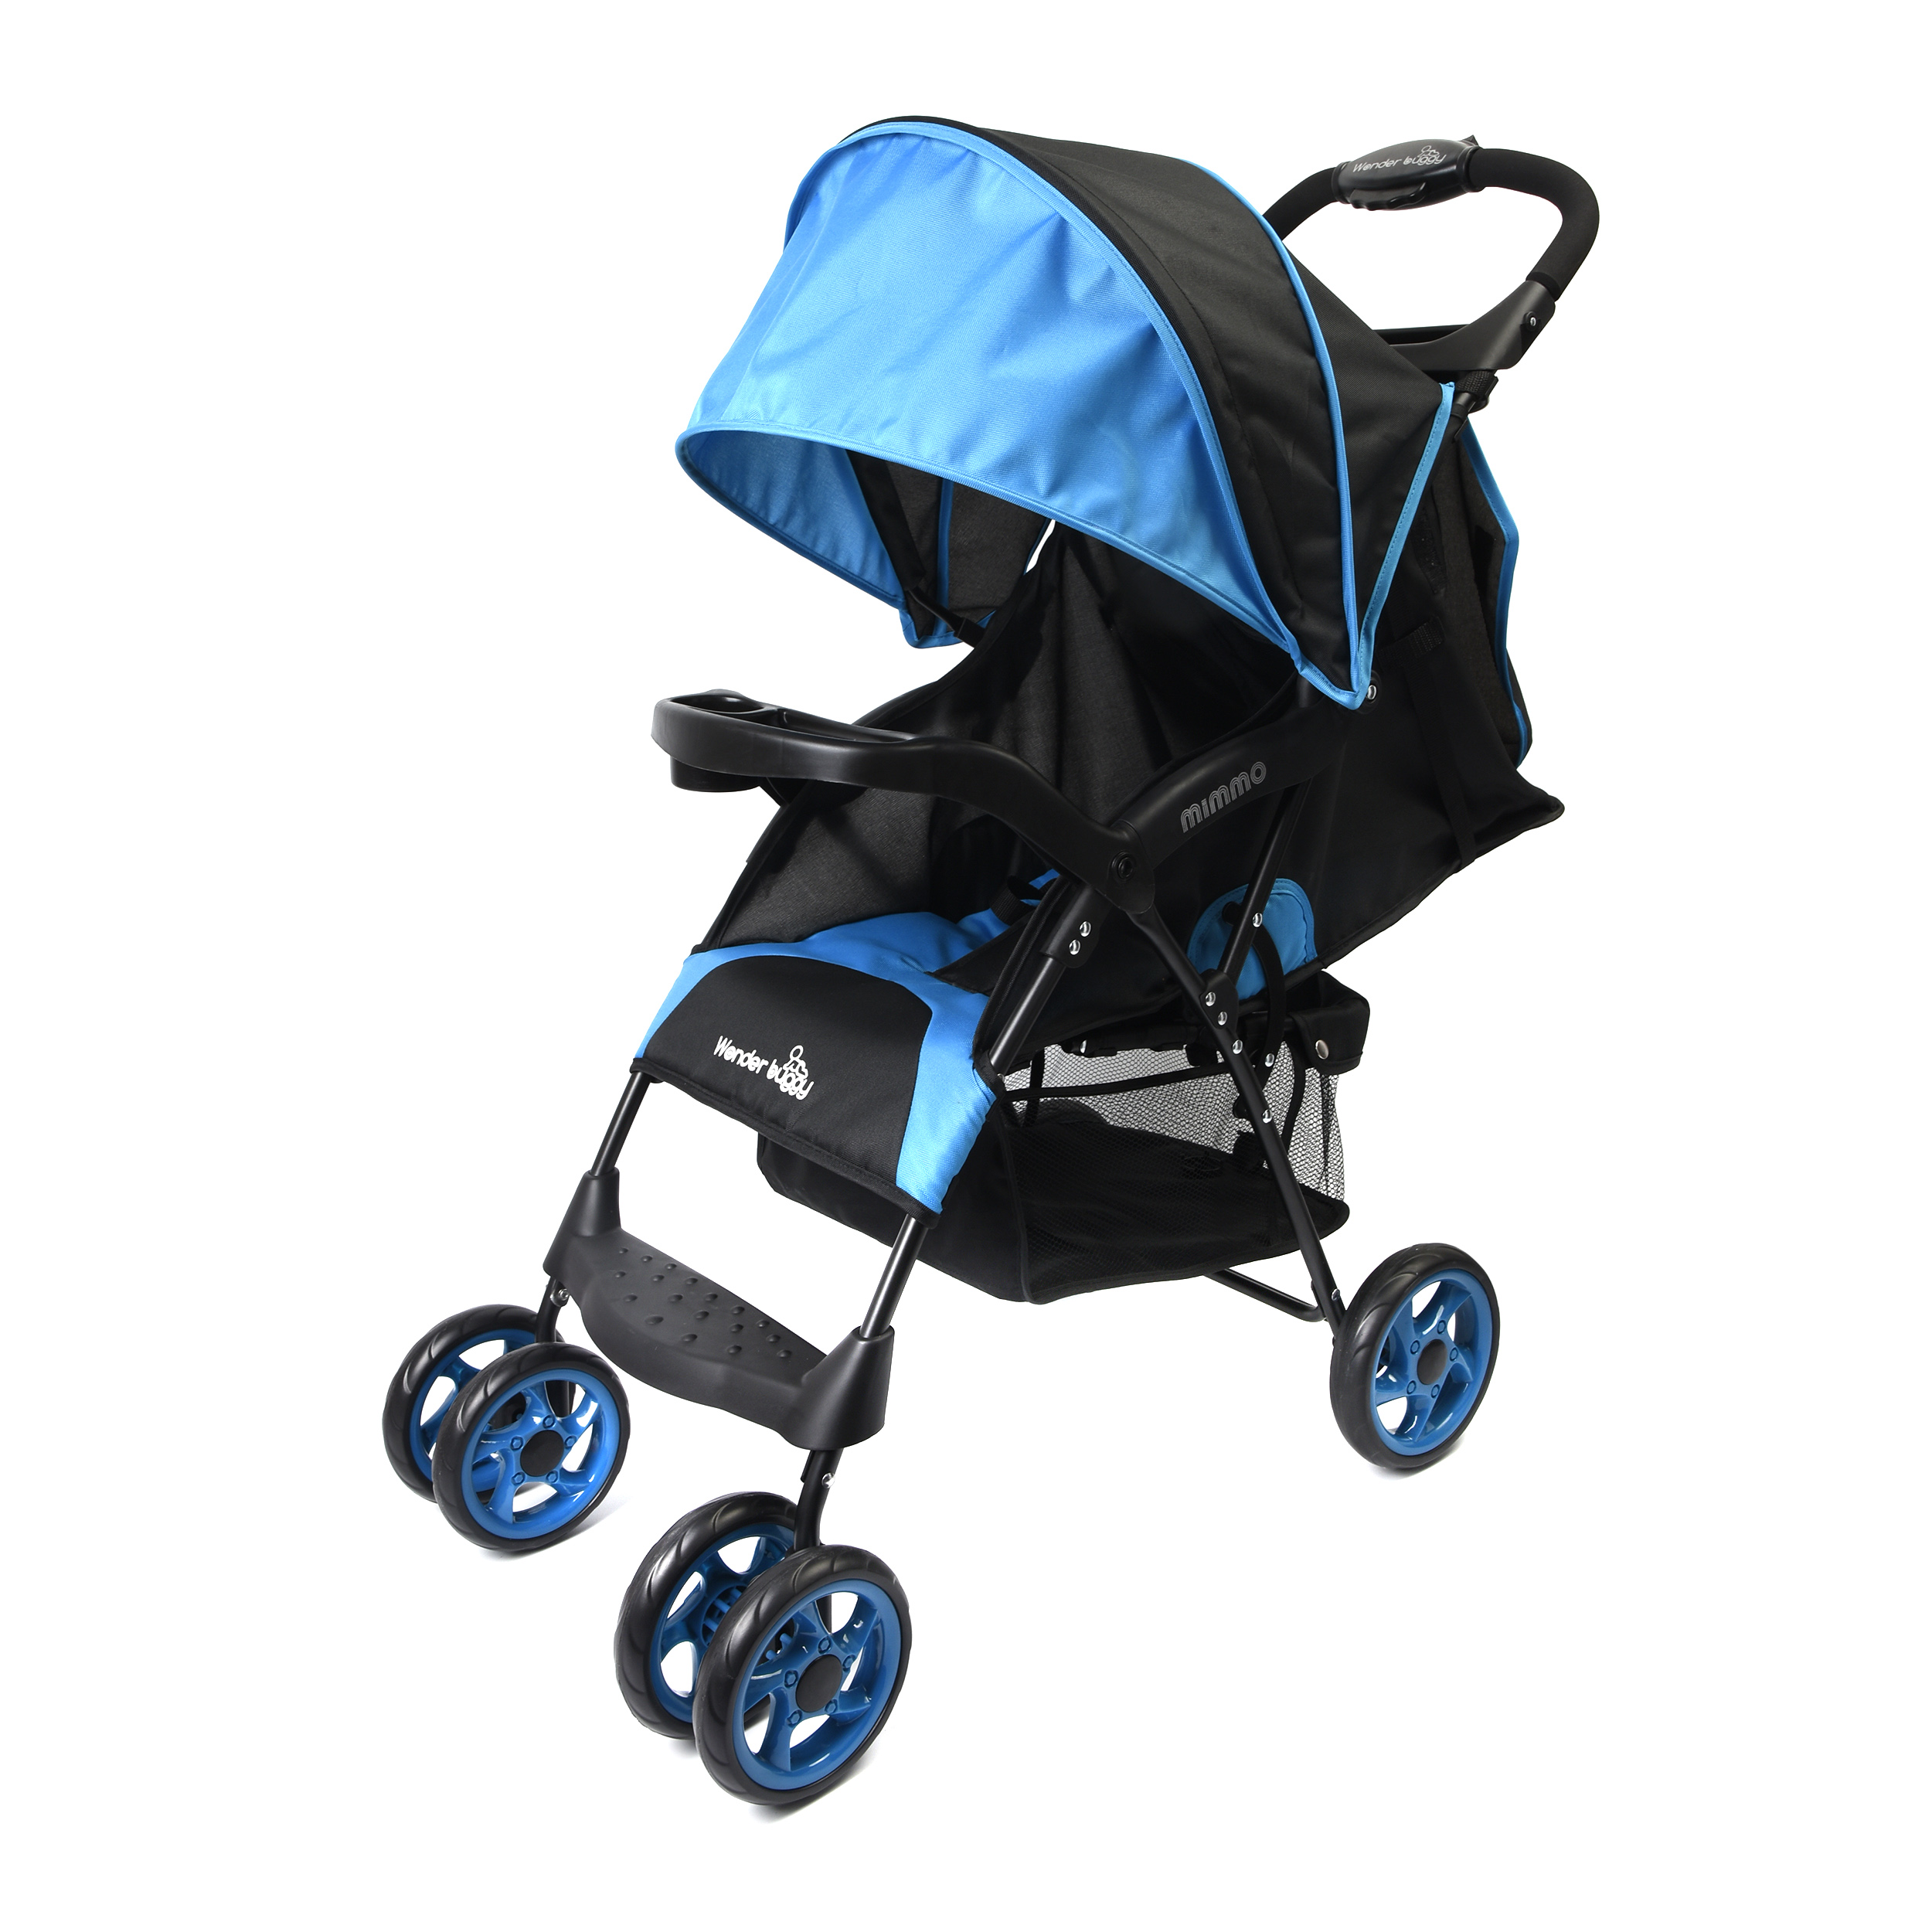 Wonder buggy Mimmo Deluxe Lightweight Stroller, Teal Blue - image 1 of 6